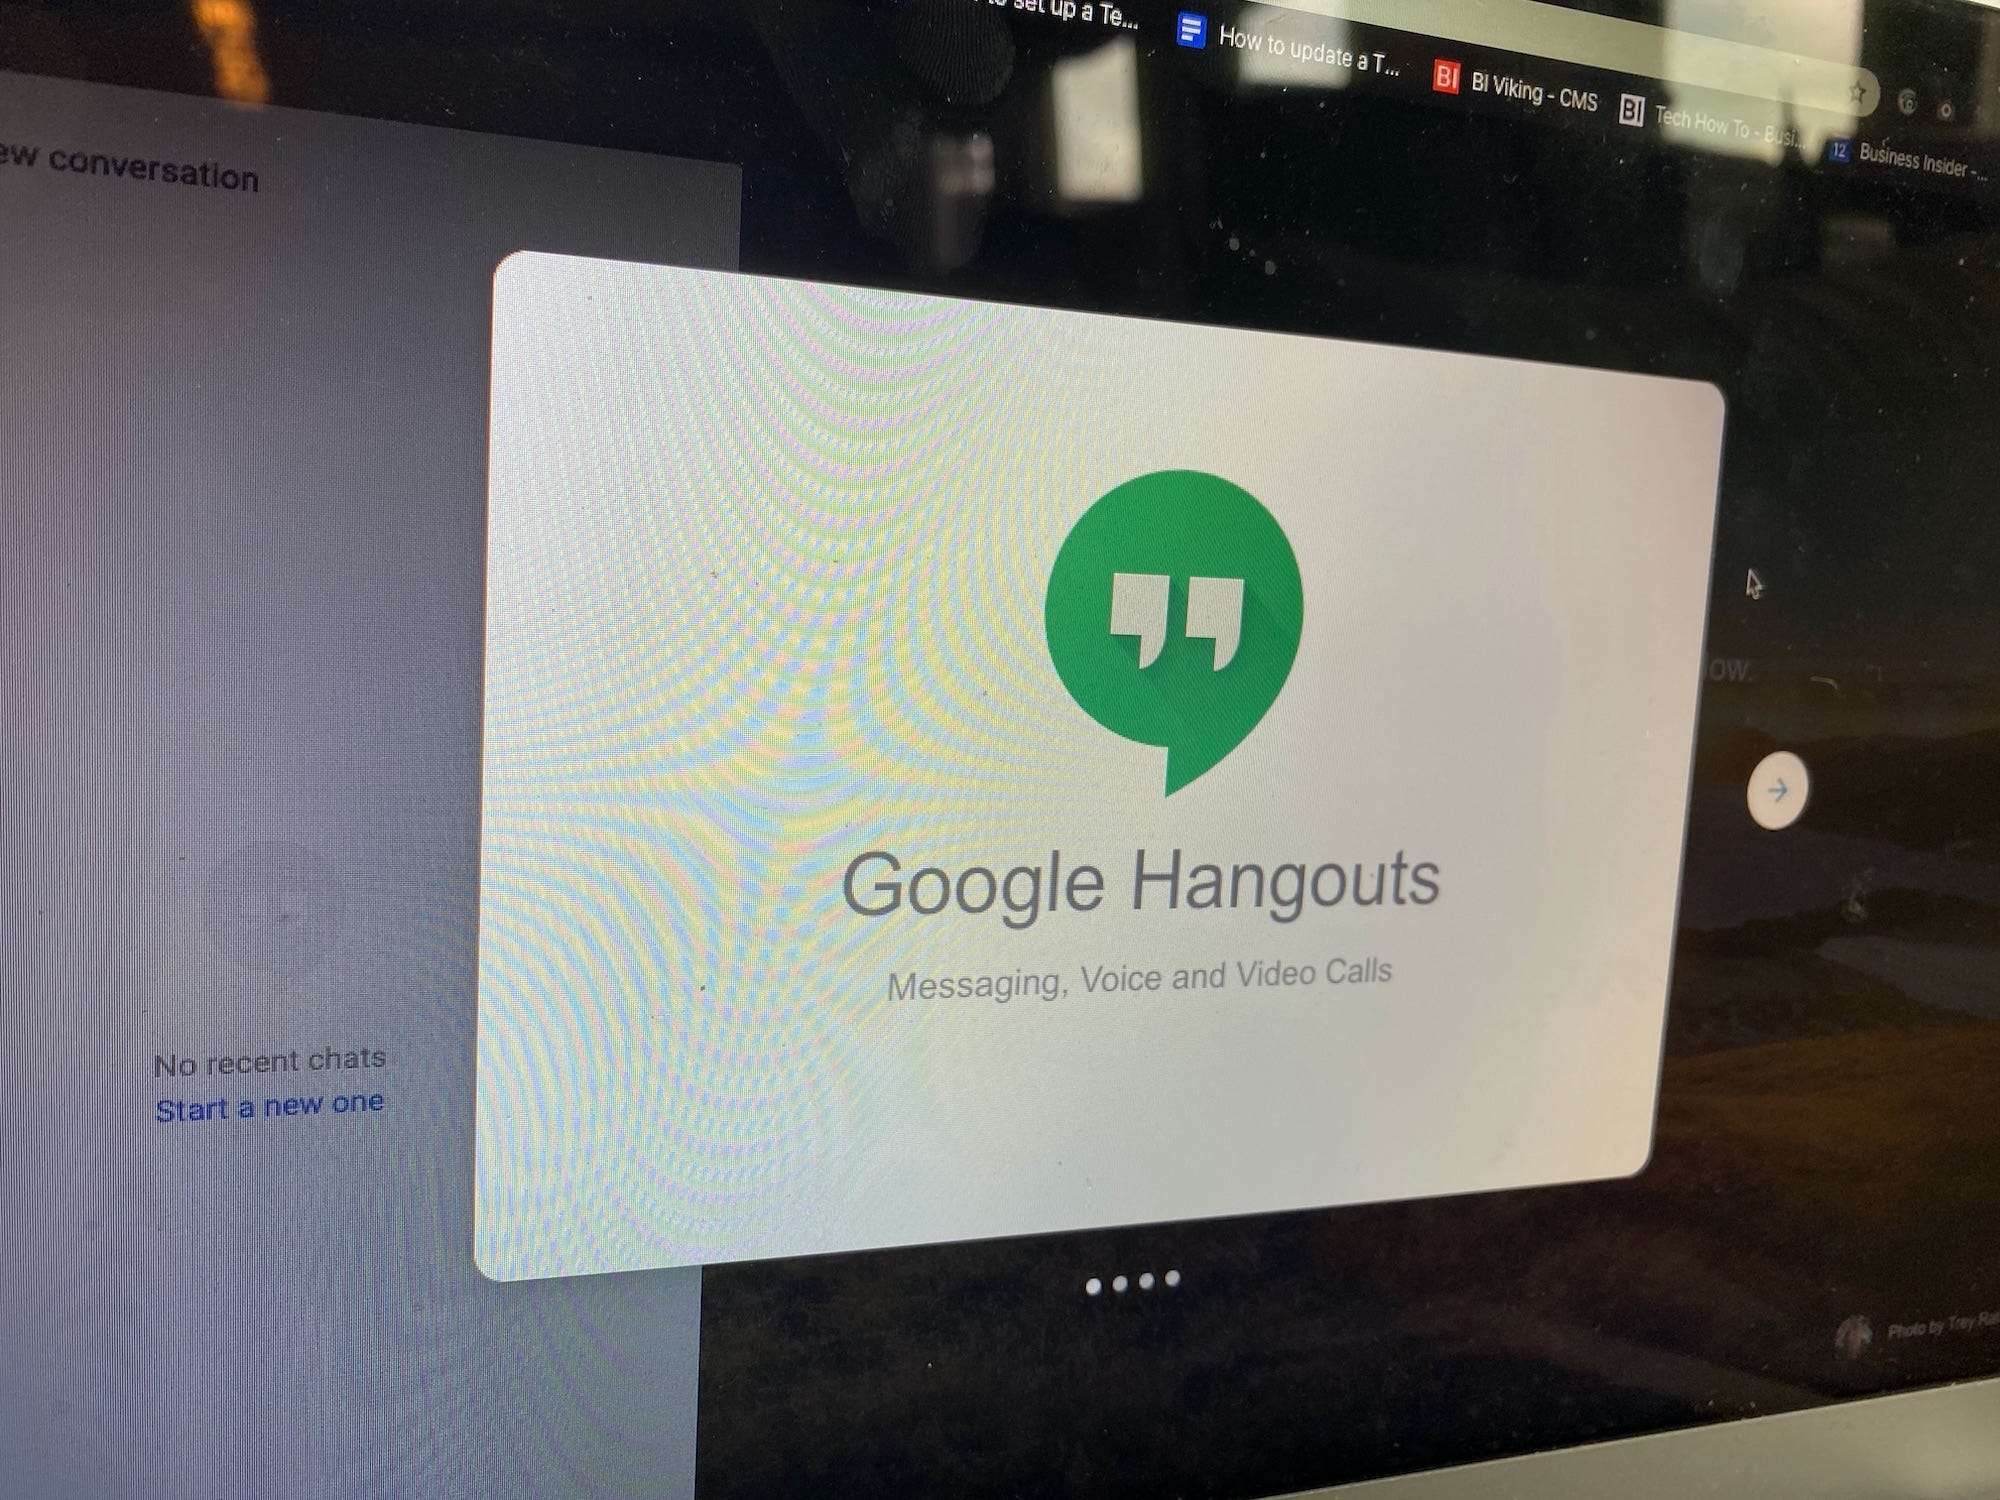 150 people can be in a google hangout